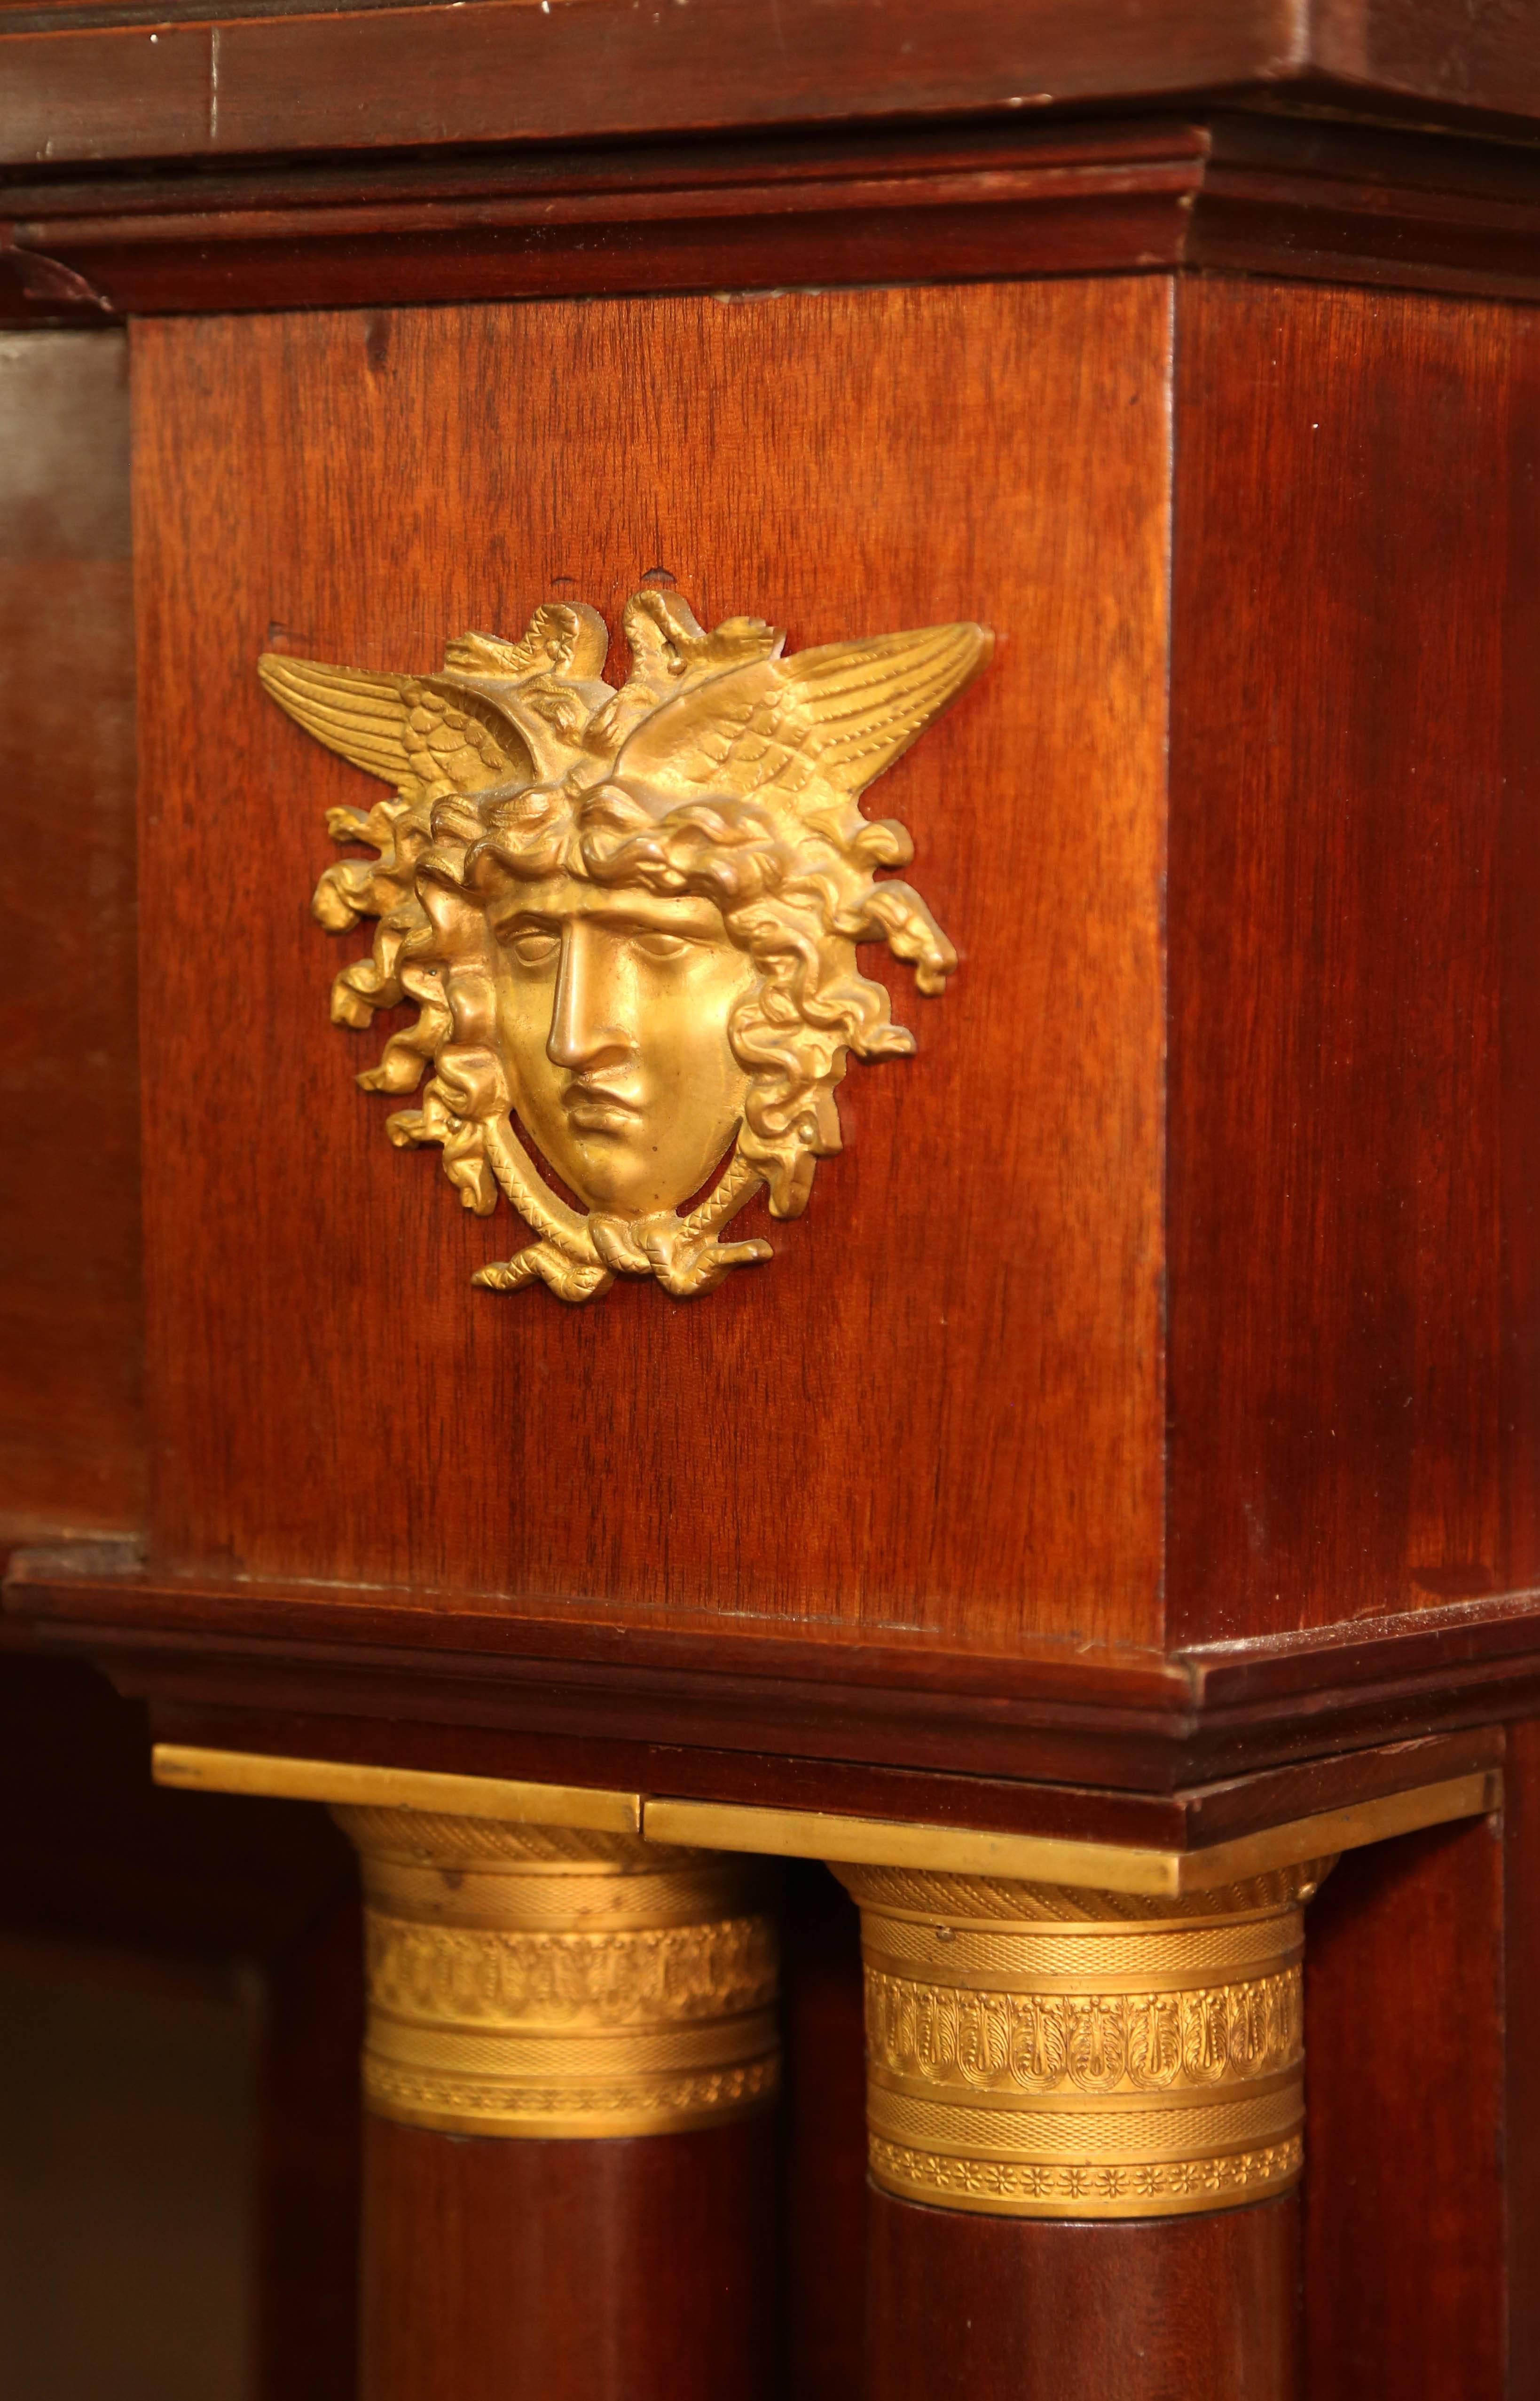 Fine quality mahogany with exquisite doré bronze mounts. Beautiful scale.